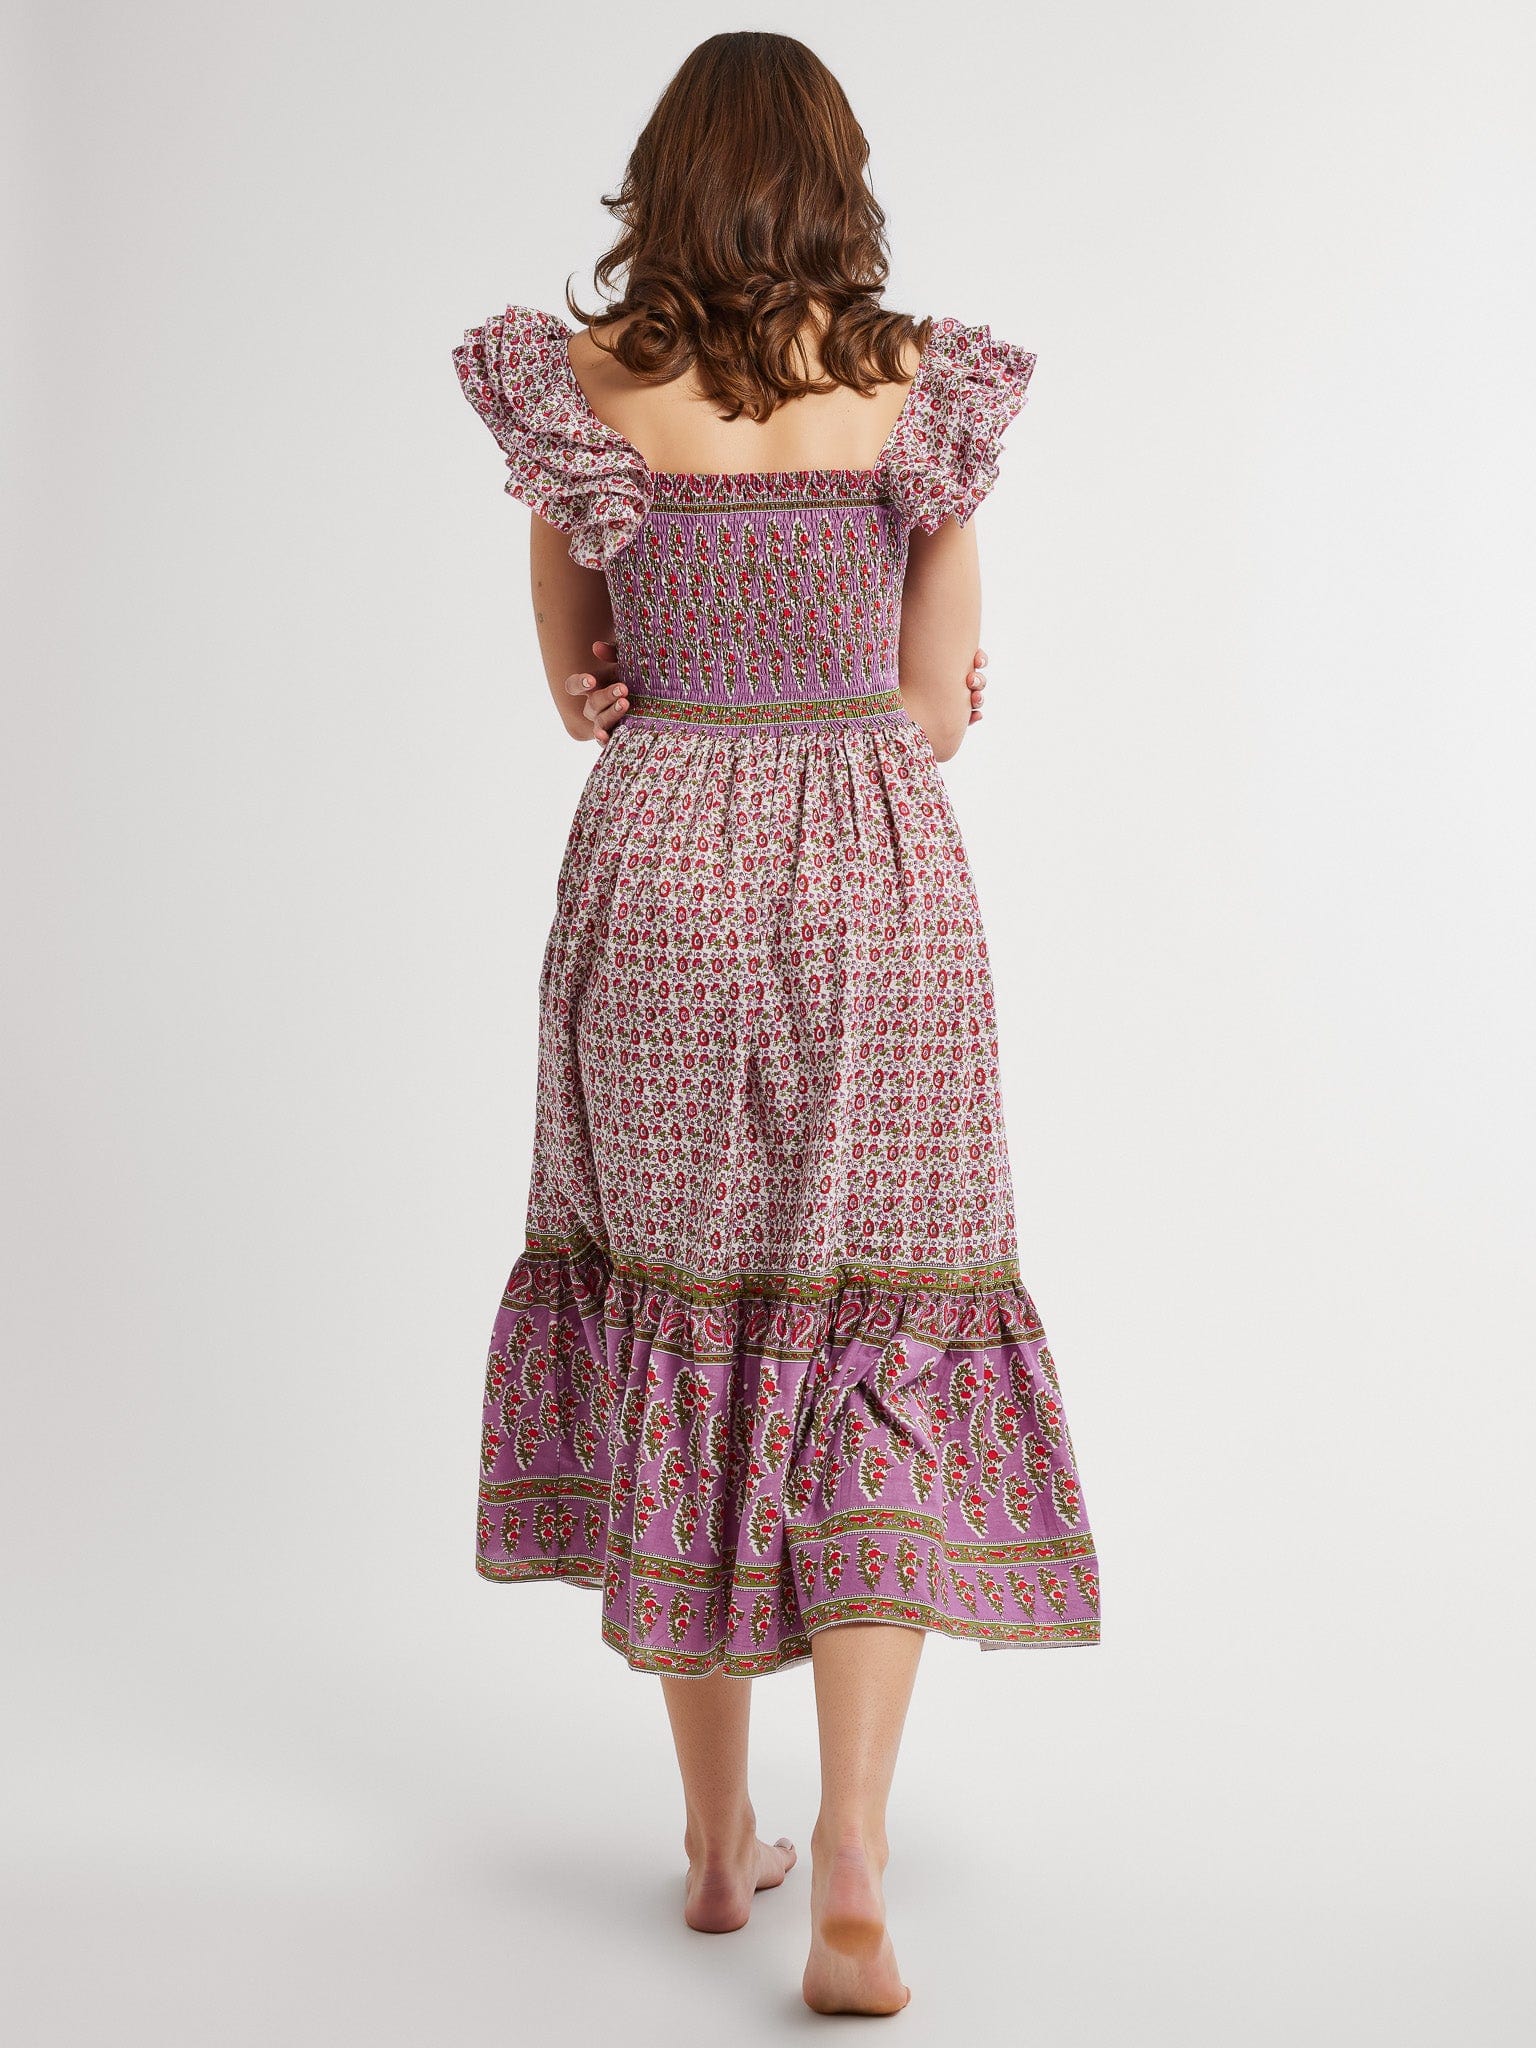 MILLE Clothing Olympia Dress in Heirloom